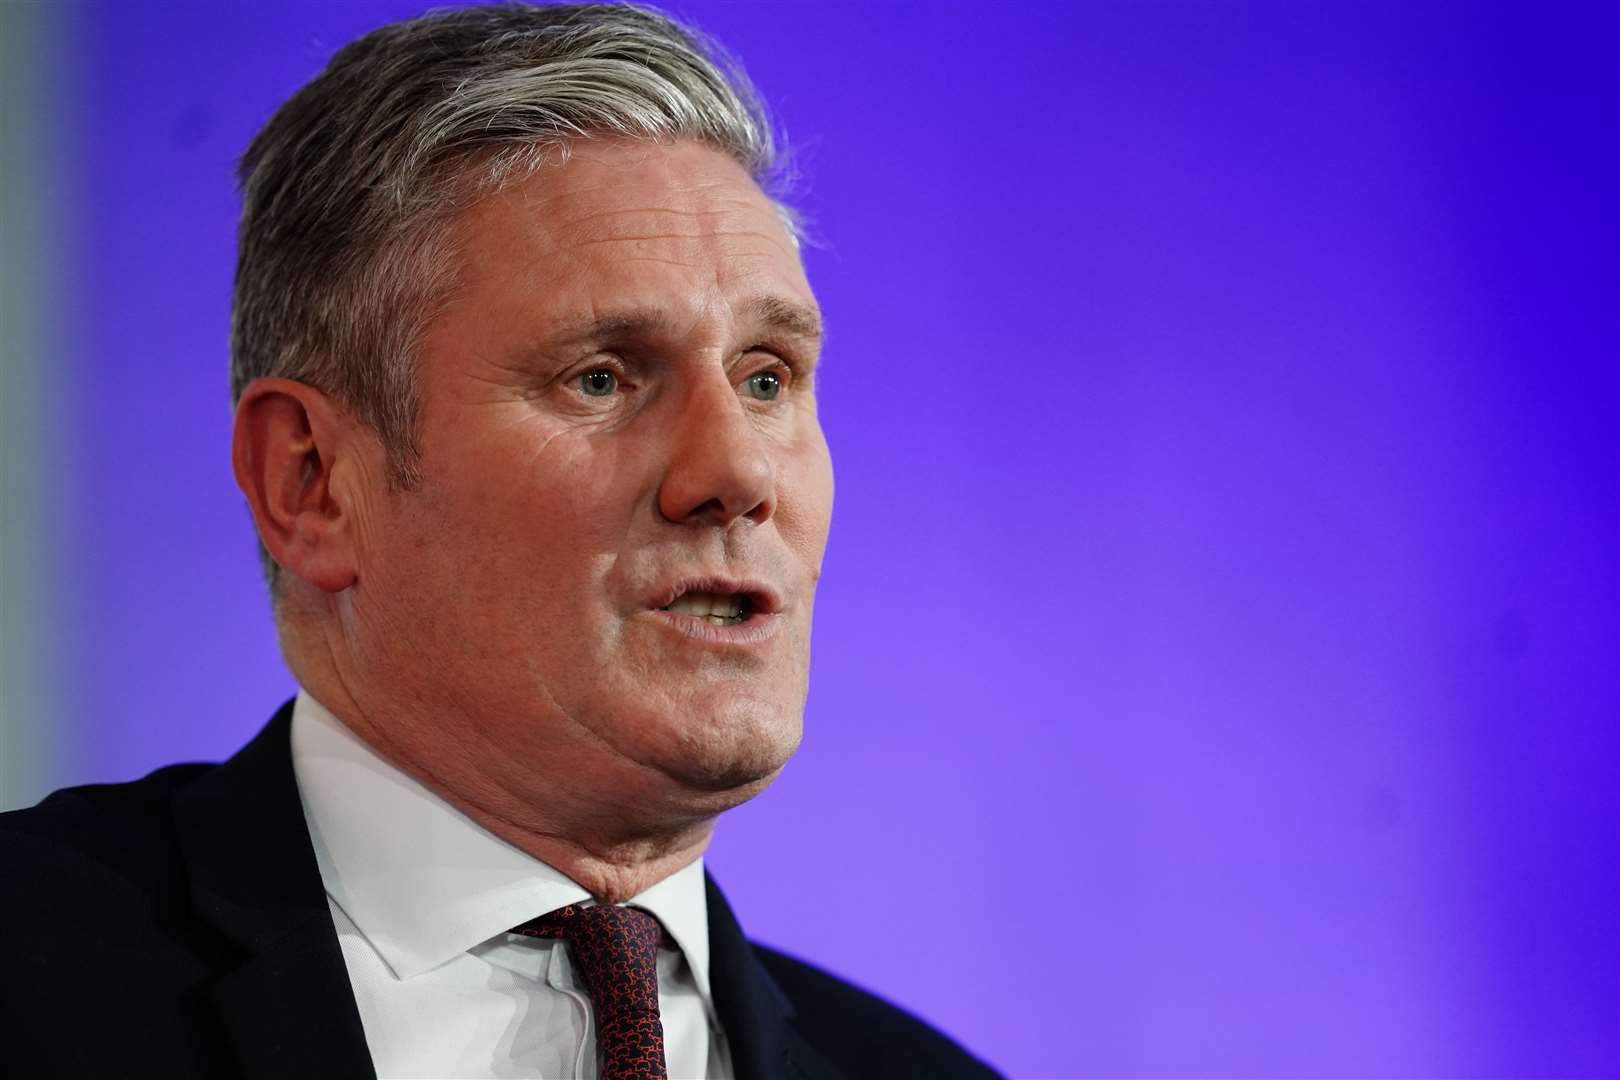 Sir Keir Starmer said the Labour Party stood with the Jewish community and ‘fully condemned Roger Waters’ (Jordan Pettitt/PA)